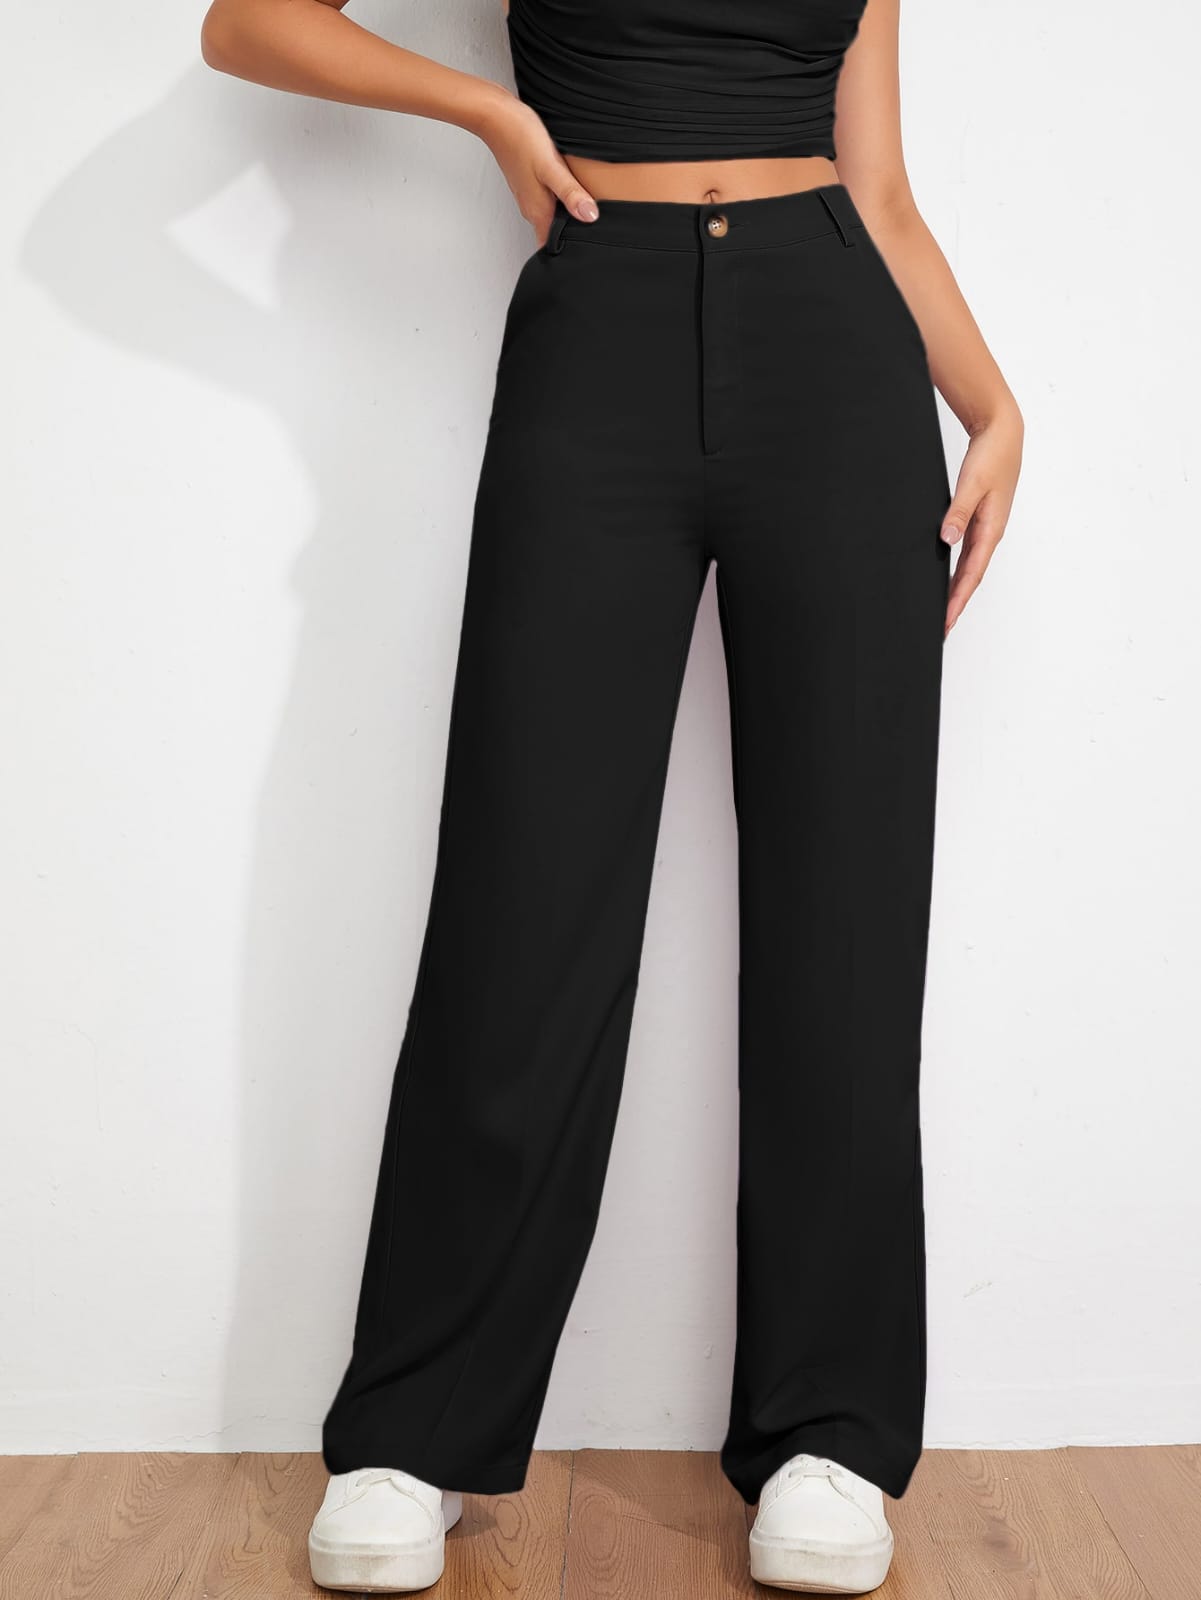 Women's Formal Wide Leg Trousers, High Waisted Trousers